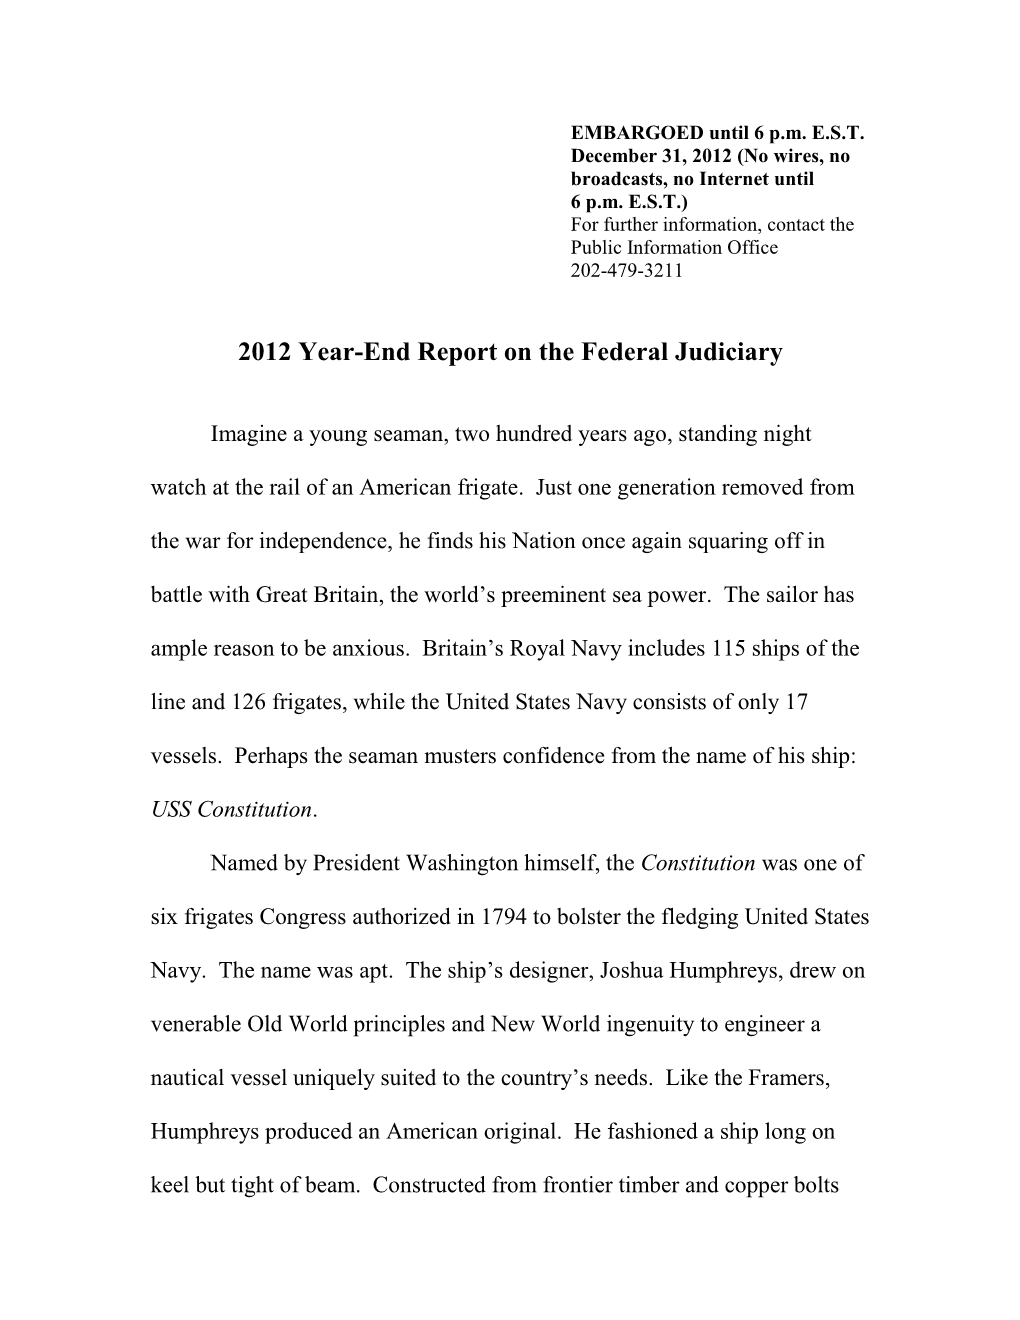 2012 Year-End Report on the Federal Judiciary